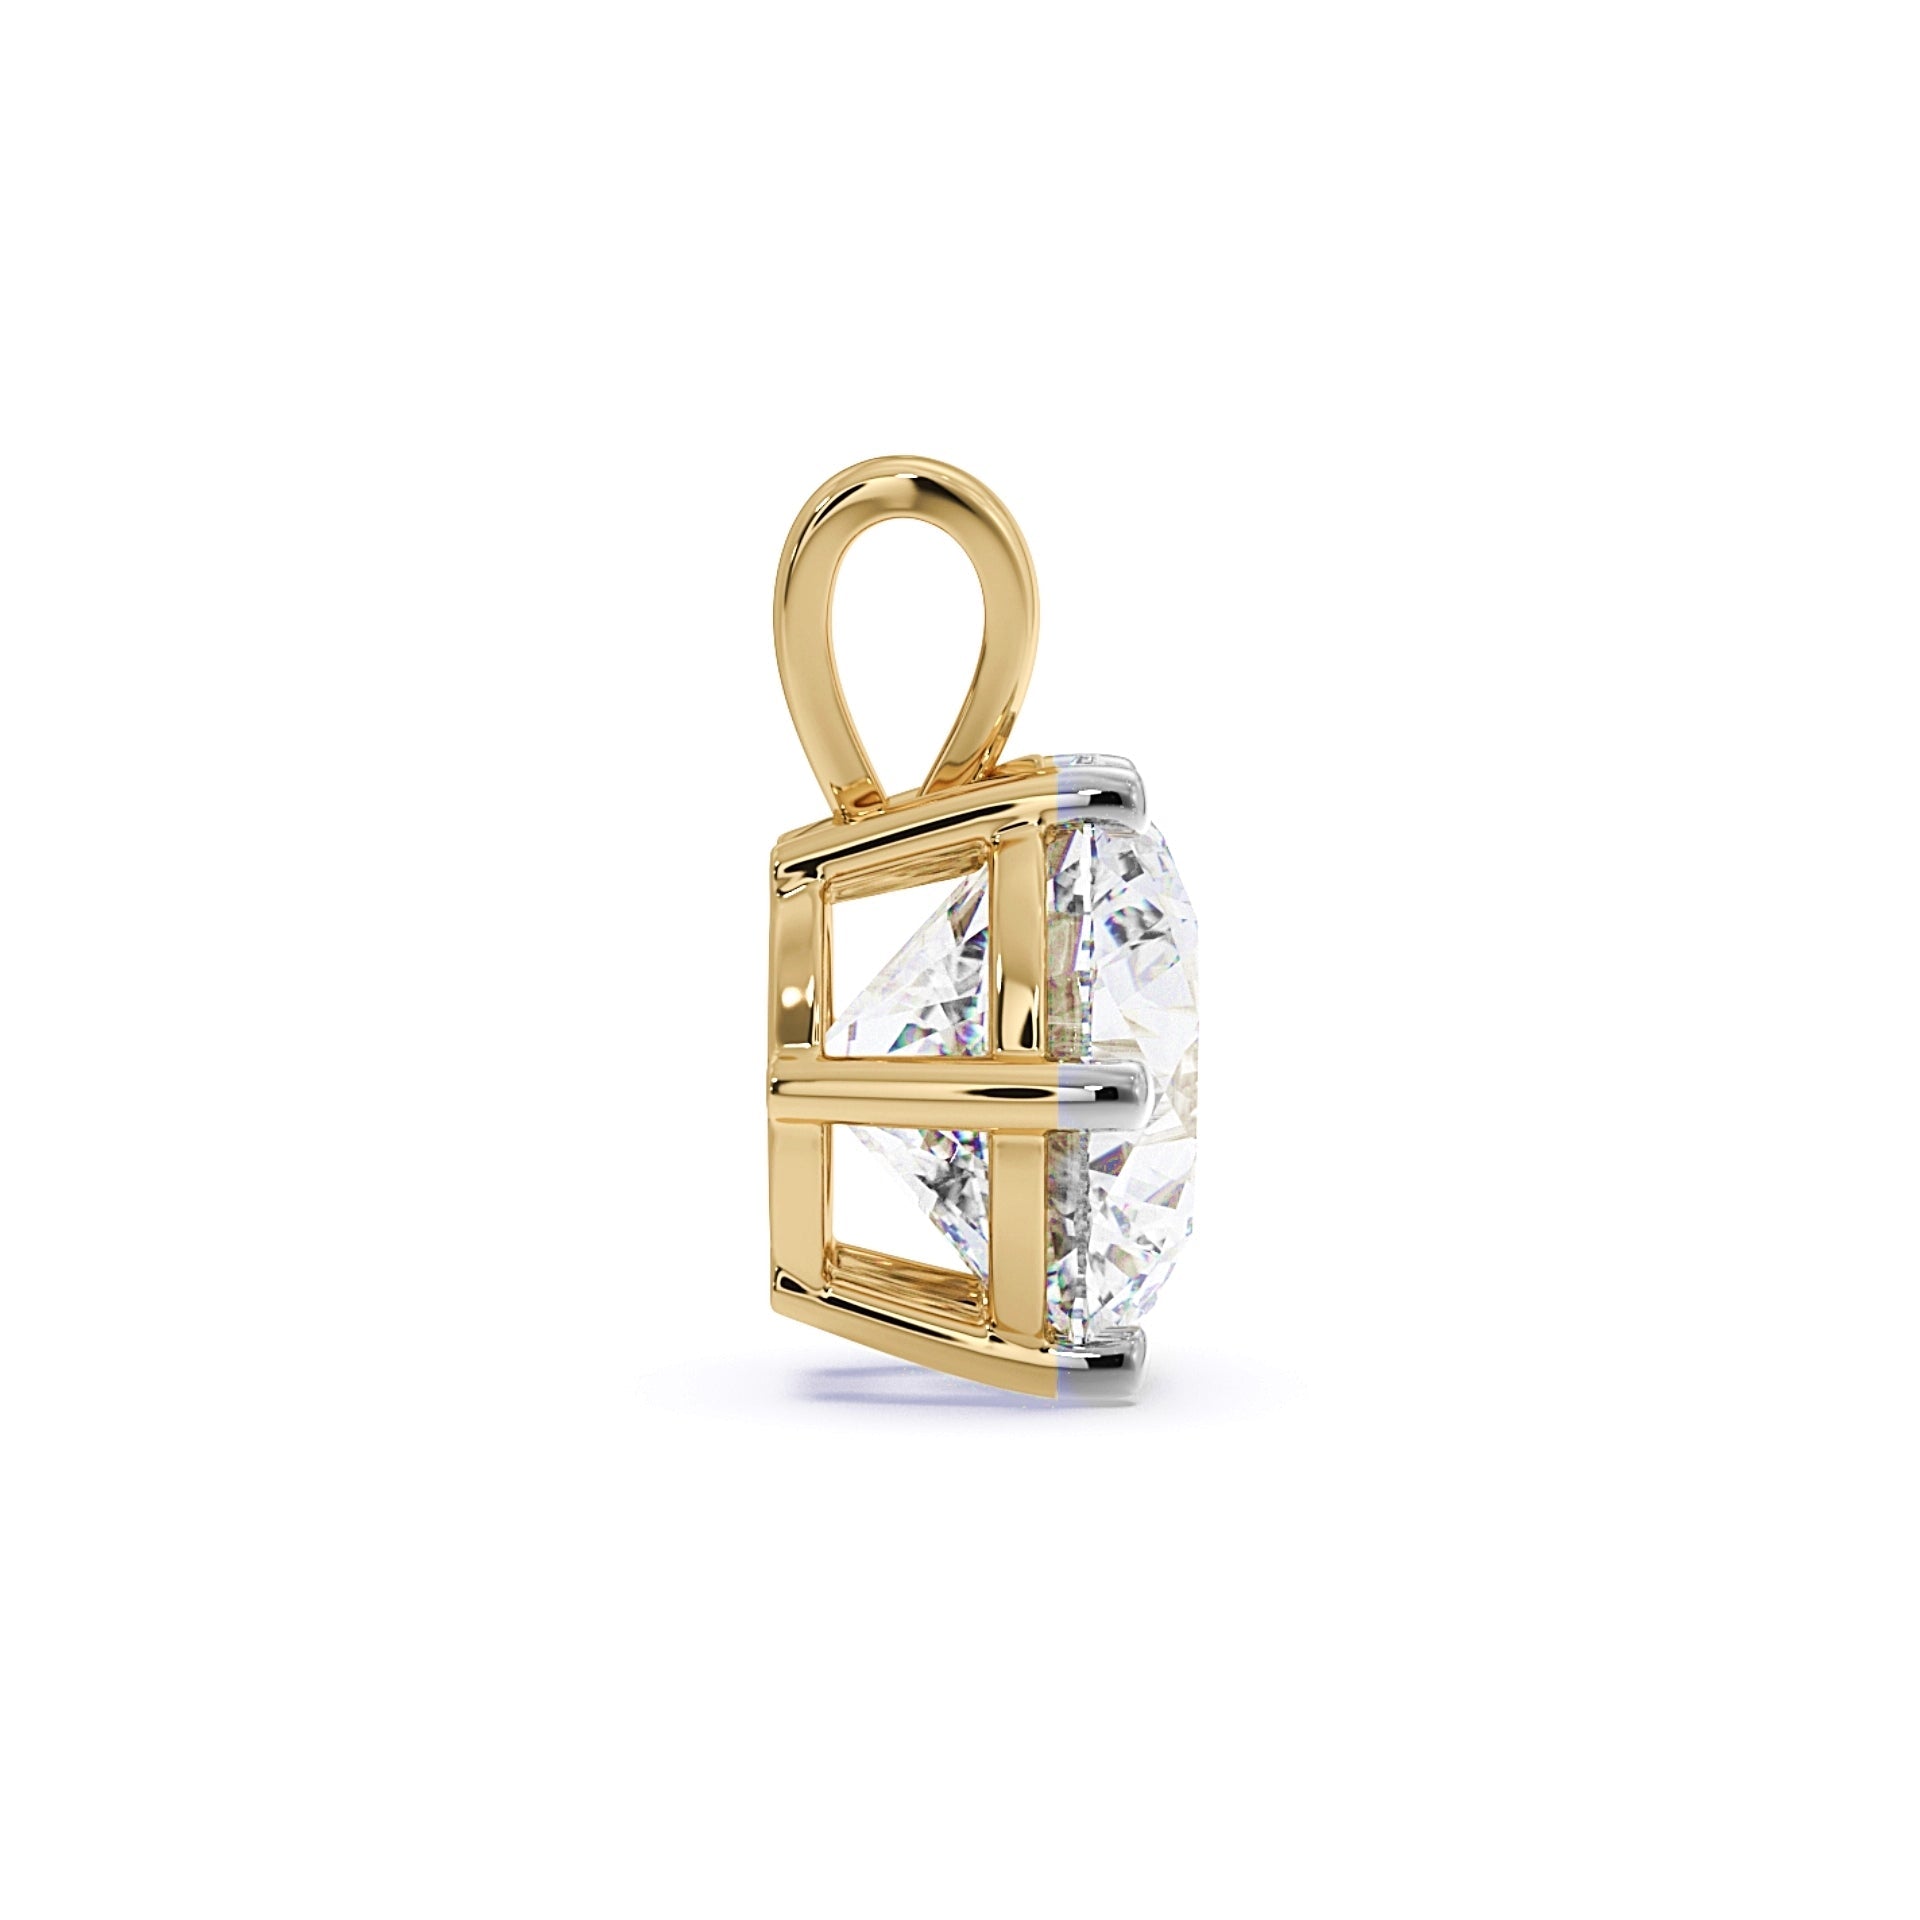 Side view of MYZA 2 carat IGI certified lab-grown diamond Pendant for women delicately set in secure six-prong settings crafted in 18kt hallmark yellow gold.